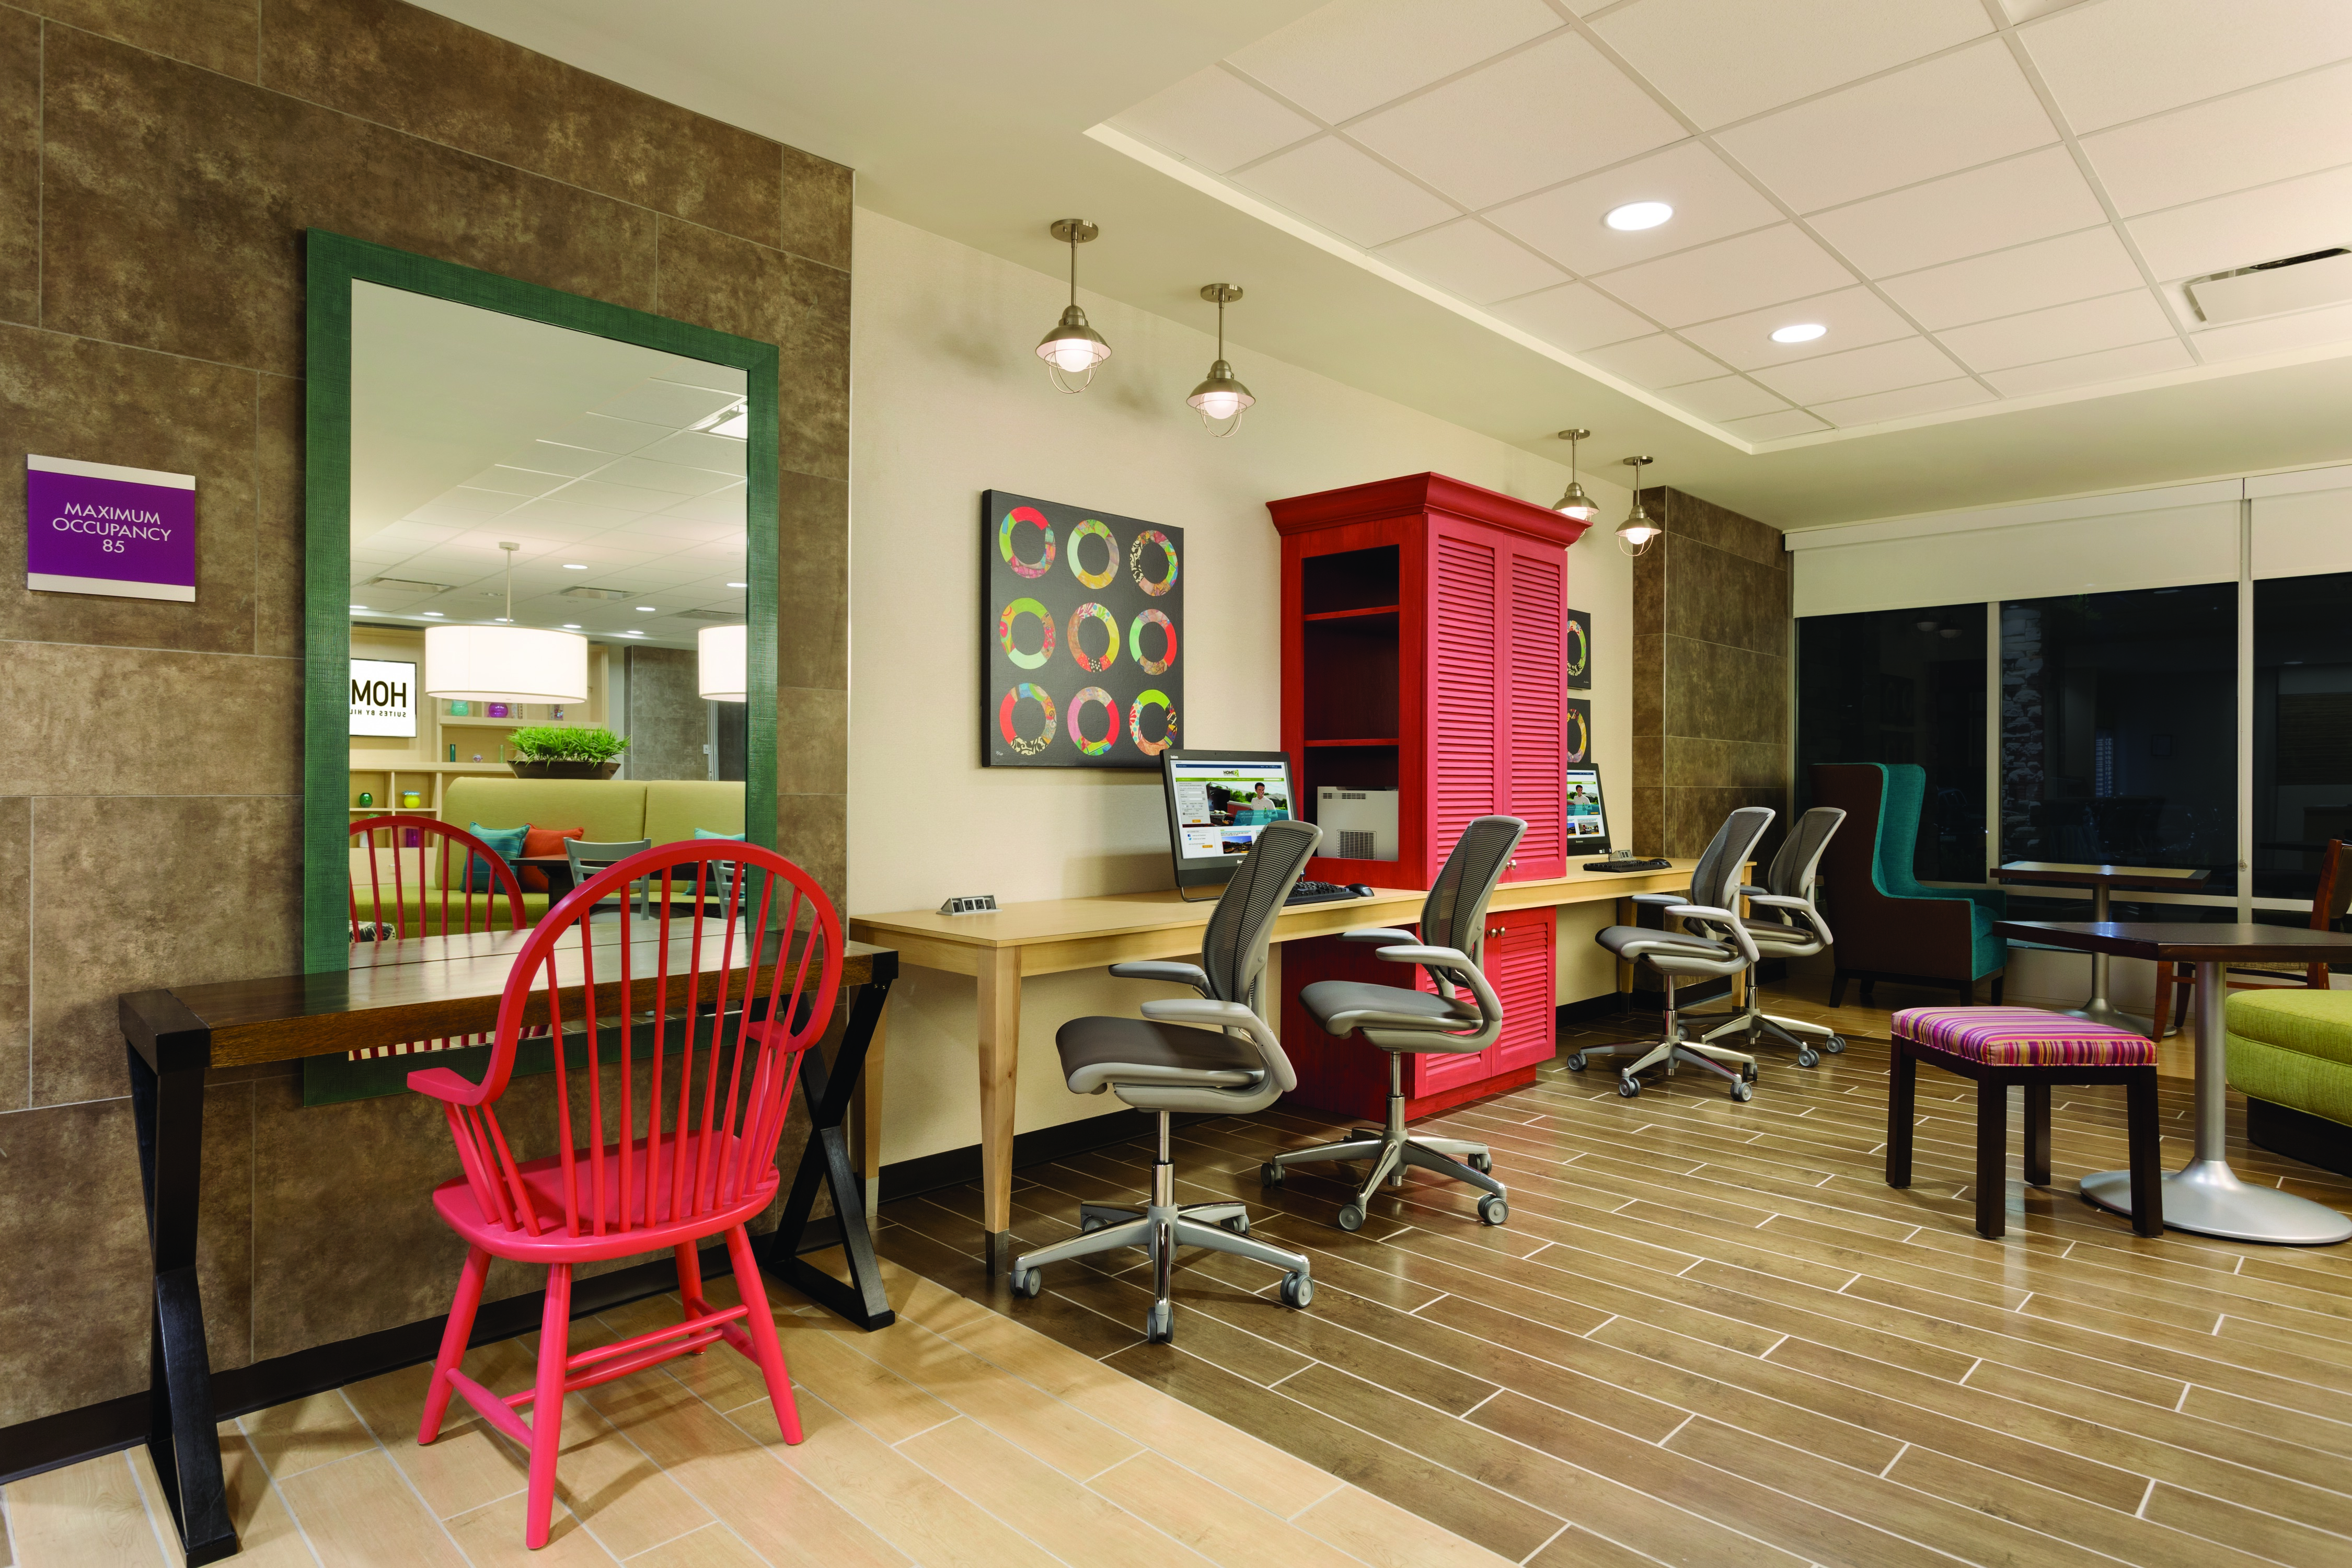 Occupancy Sign by Large Mirror Above Small Desk With Red Wooden Chair, Colorful Wall Art, Red Storage Cabinet Between Two Computers on Long Desk With Four Ergonomic Chairs and Additional Seating by Window in Business Center